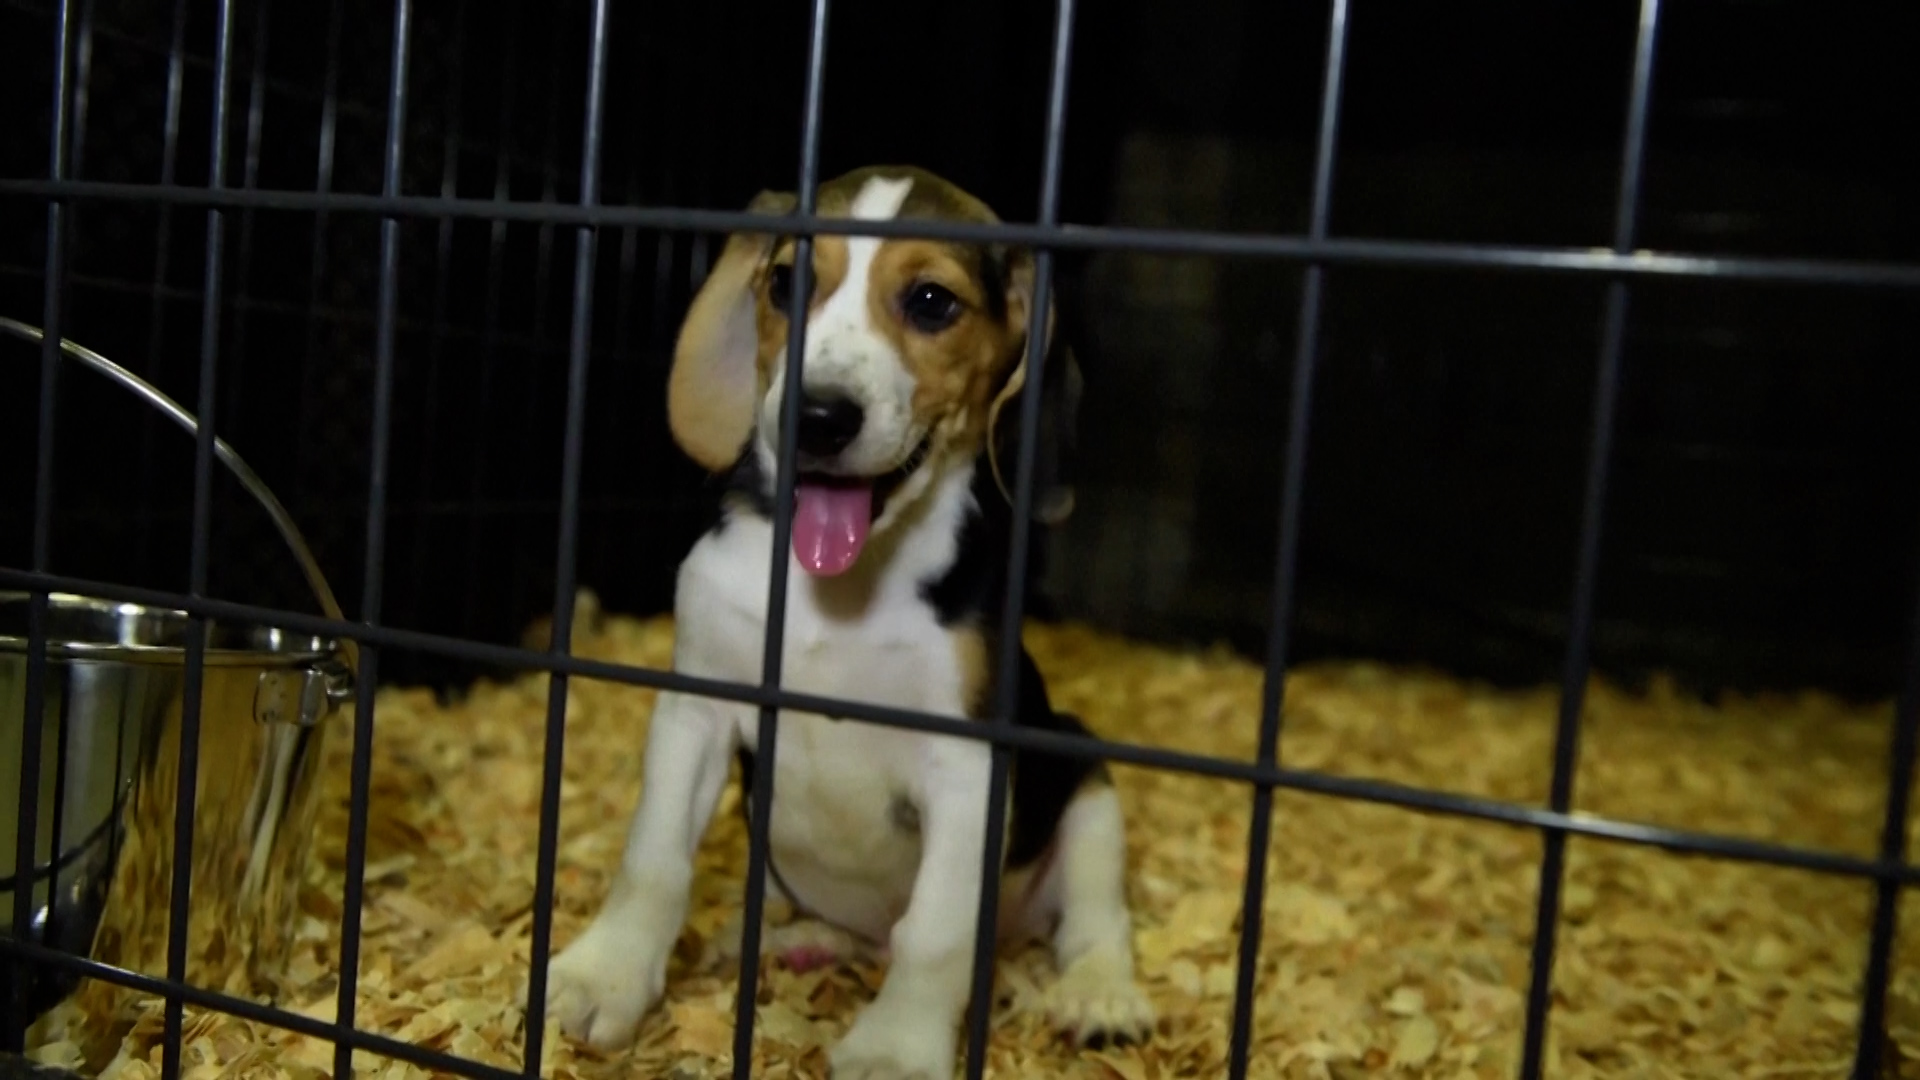 The records found that from January 1, 2021 to July 22, 2021, the deaths of more than 300 beagle puppies at the facility were attributed to 